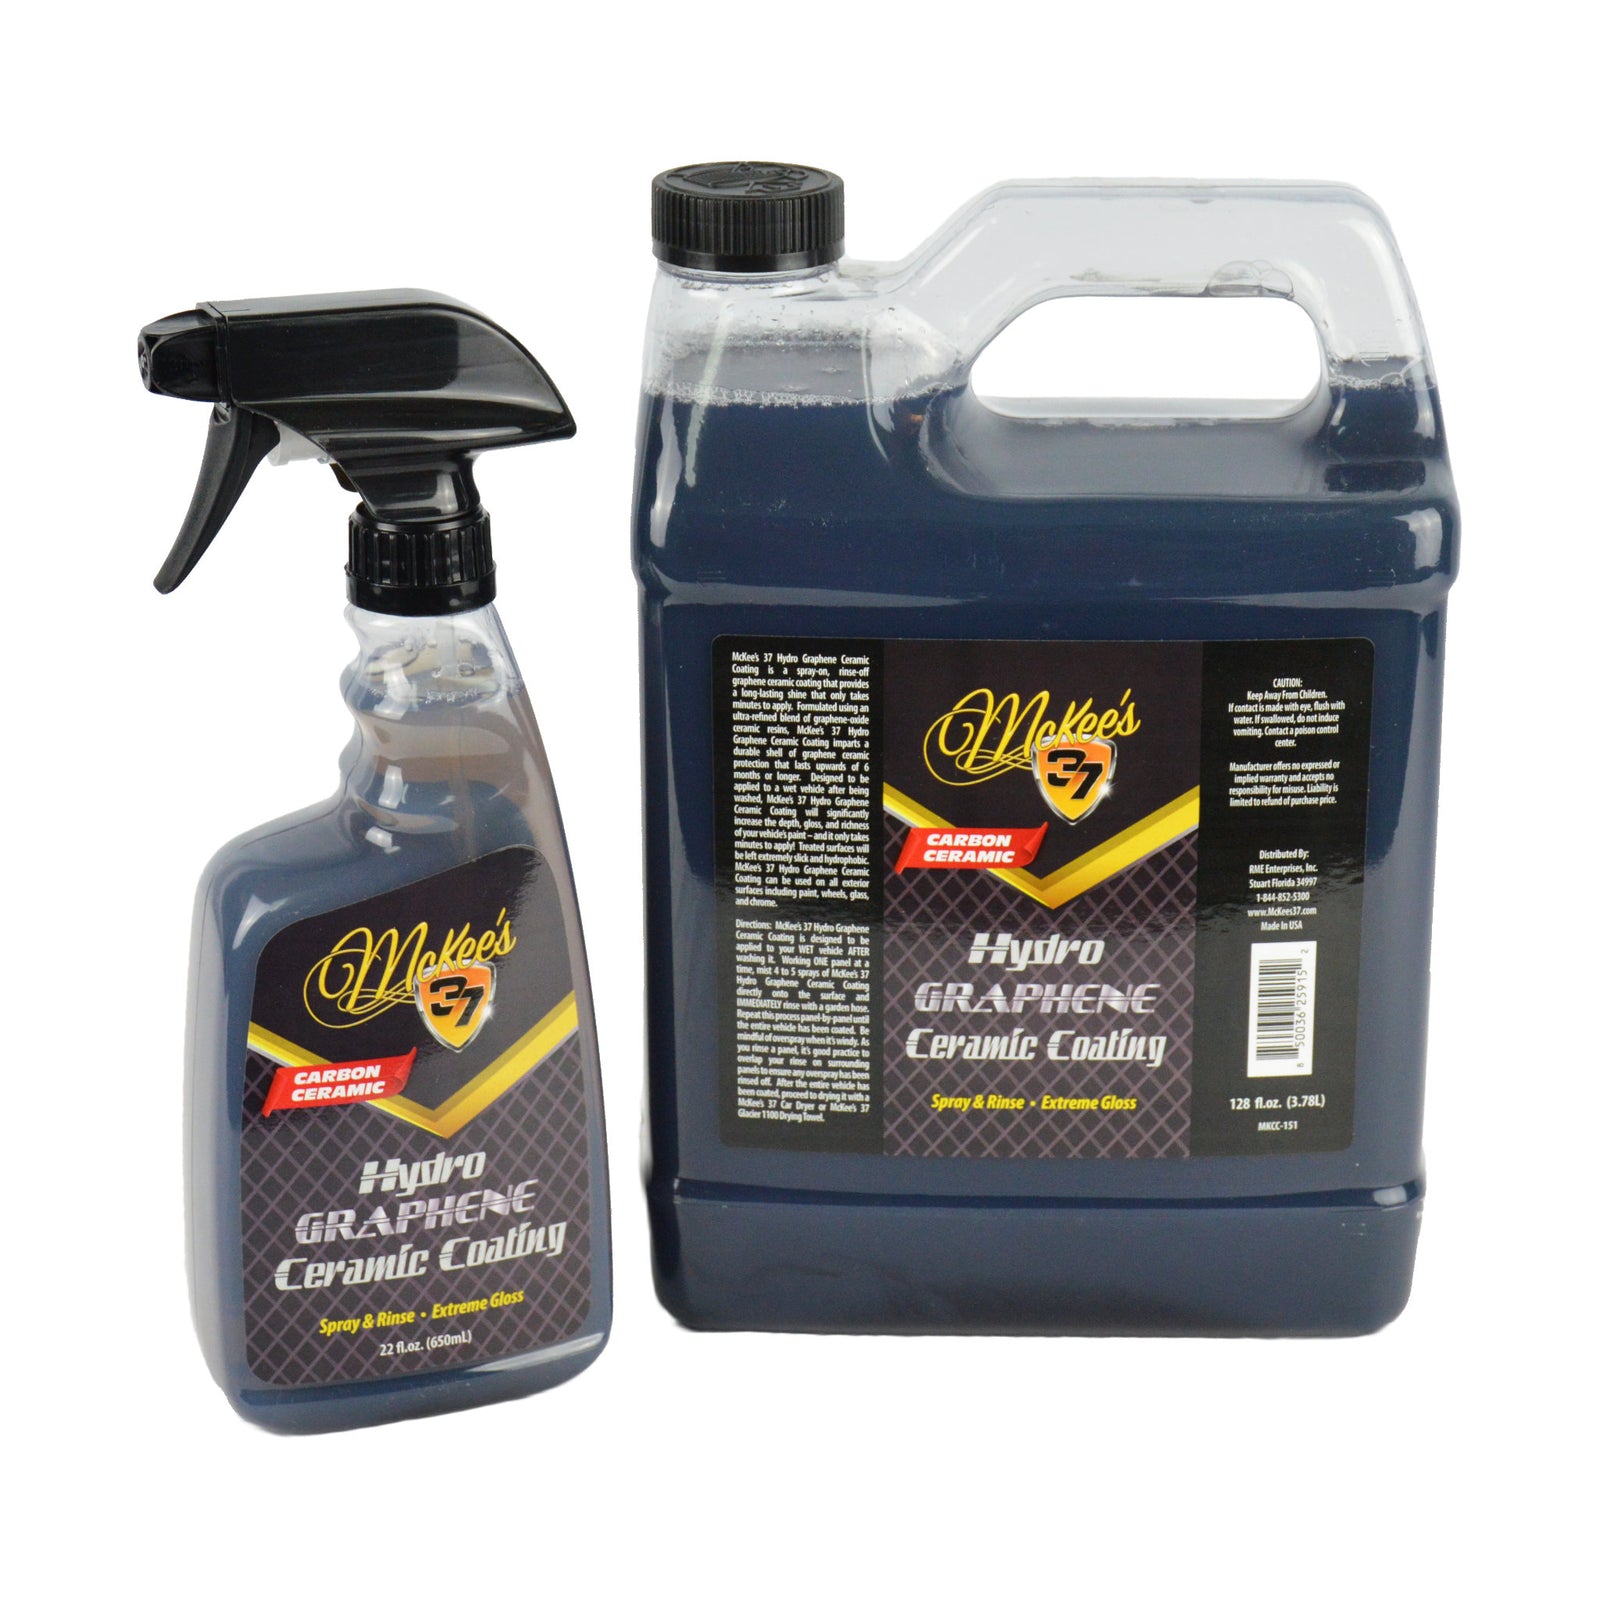 Deep Rich Jet Black Graphene Tire Shine | Non-Greasy Easy No Scrubbing Application | Max UV Protection - Stop Dry Rotting - 2 Bottles - Torque Detail